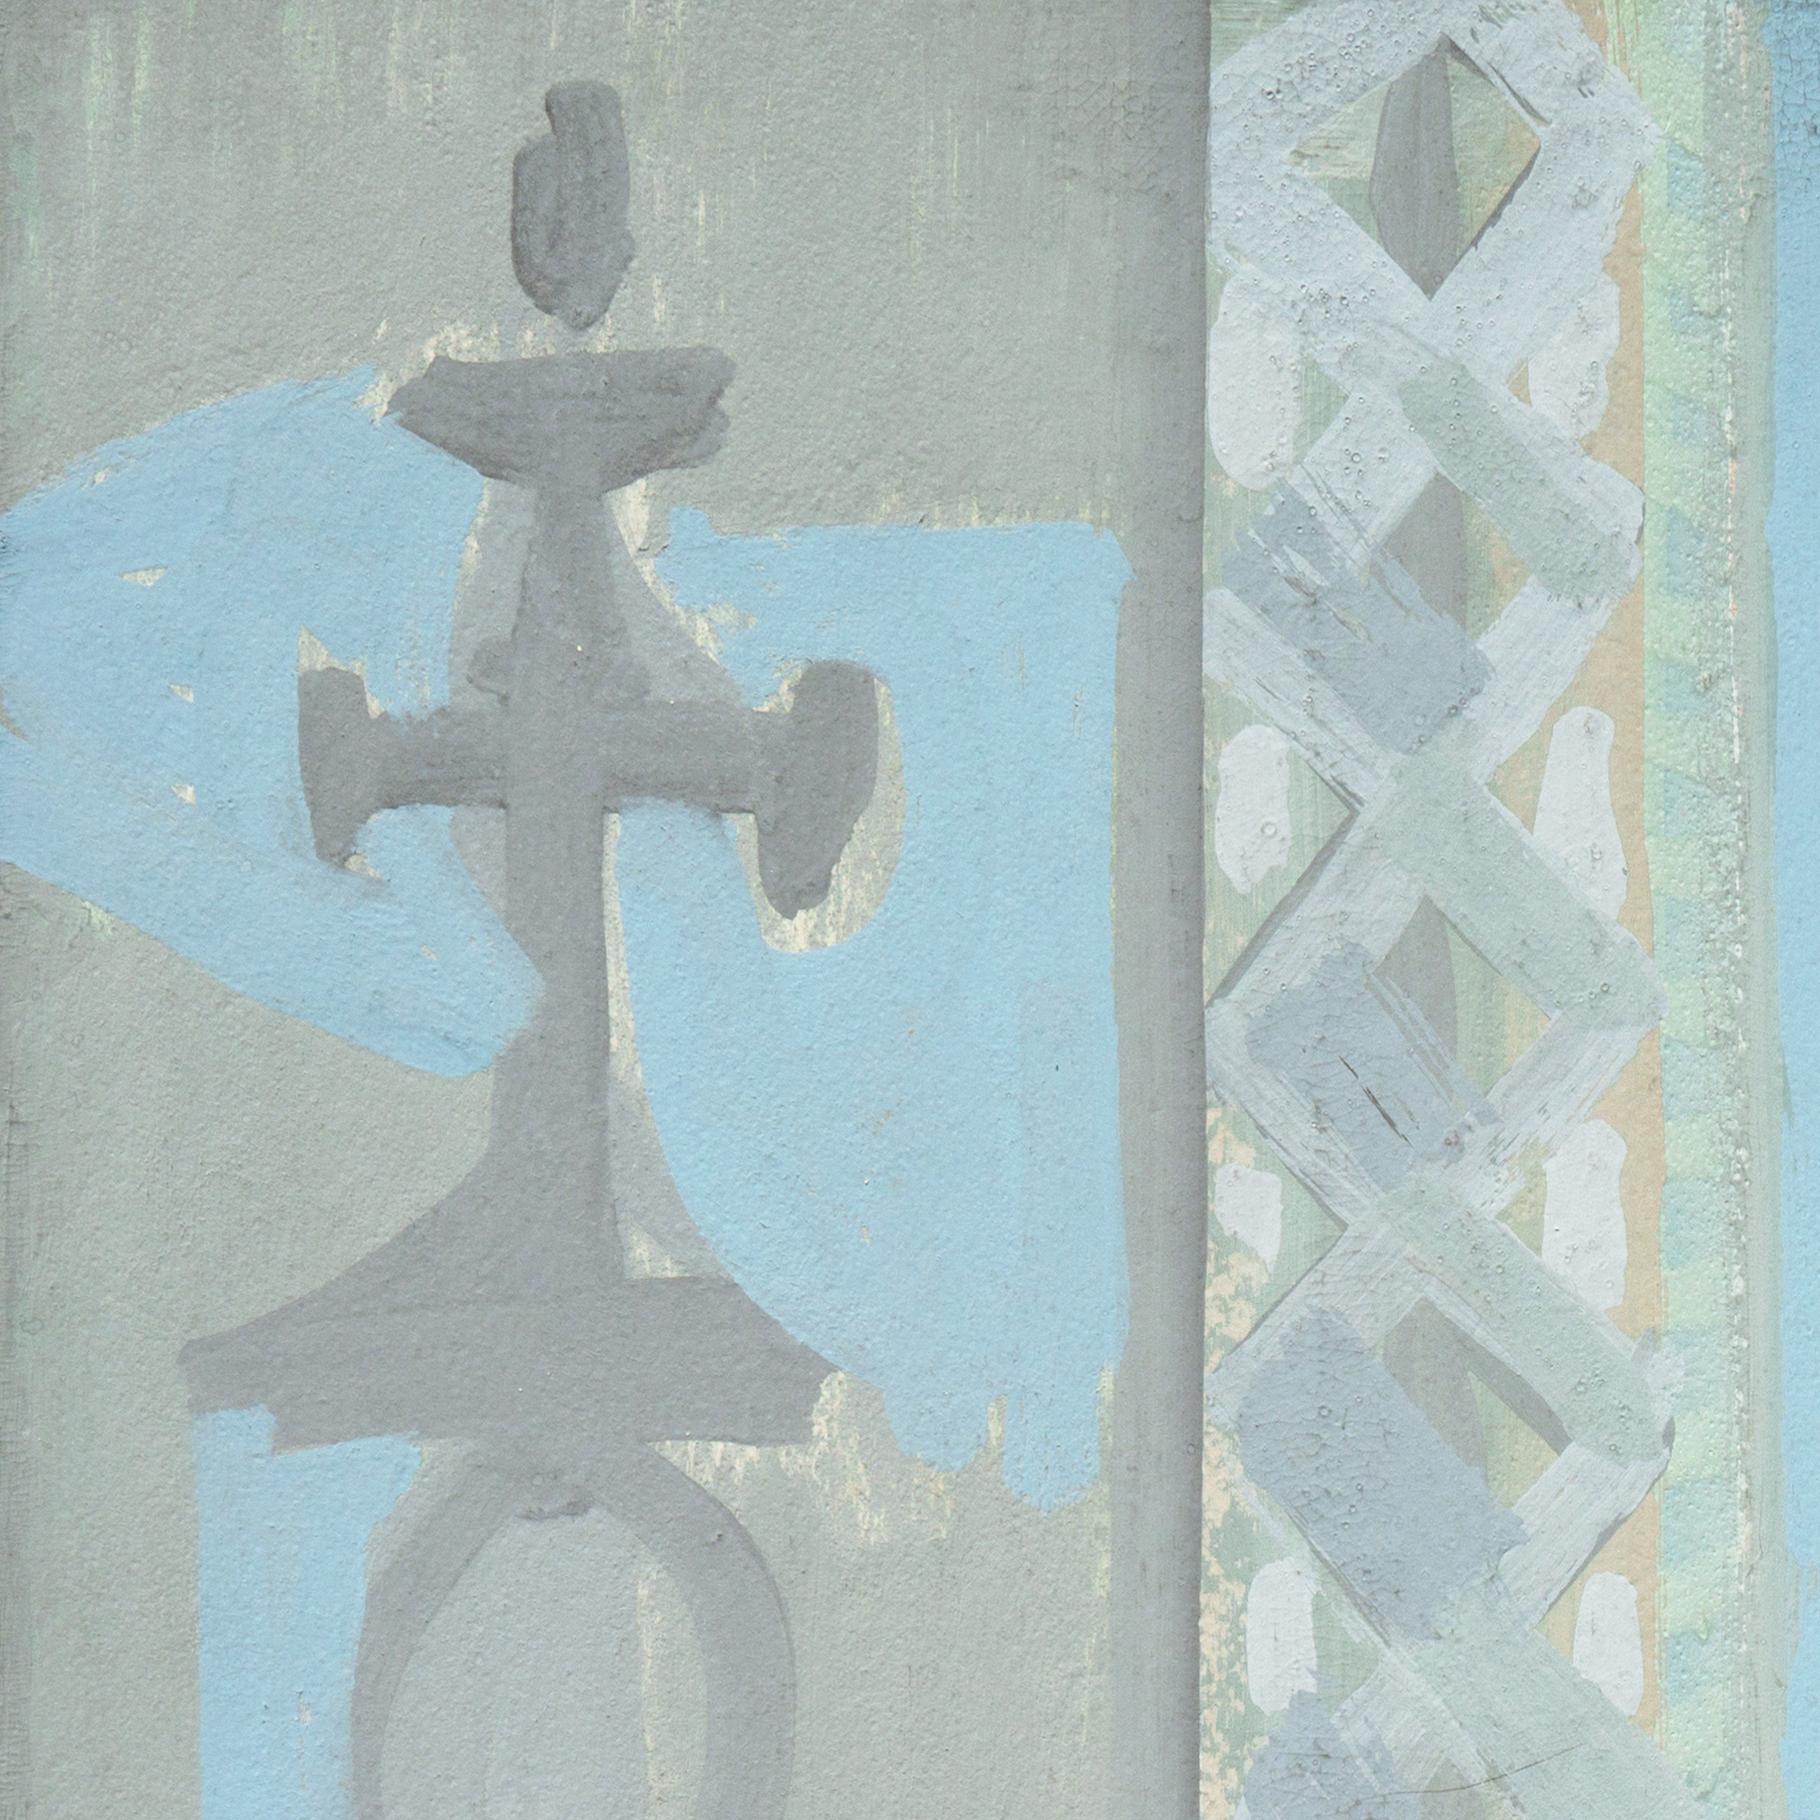 'Forms in Blue & Gray', Bay Area Abstraction, San Francisco Museum of Fine Arts For Sale 1